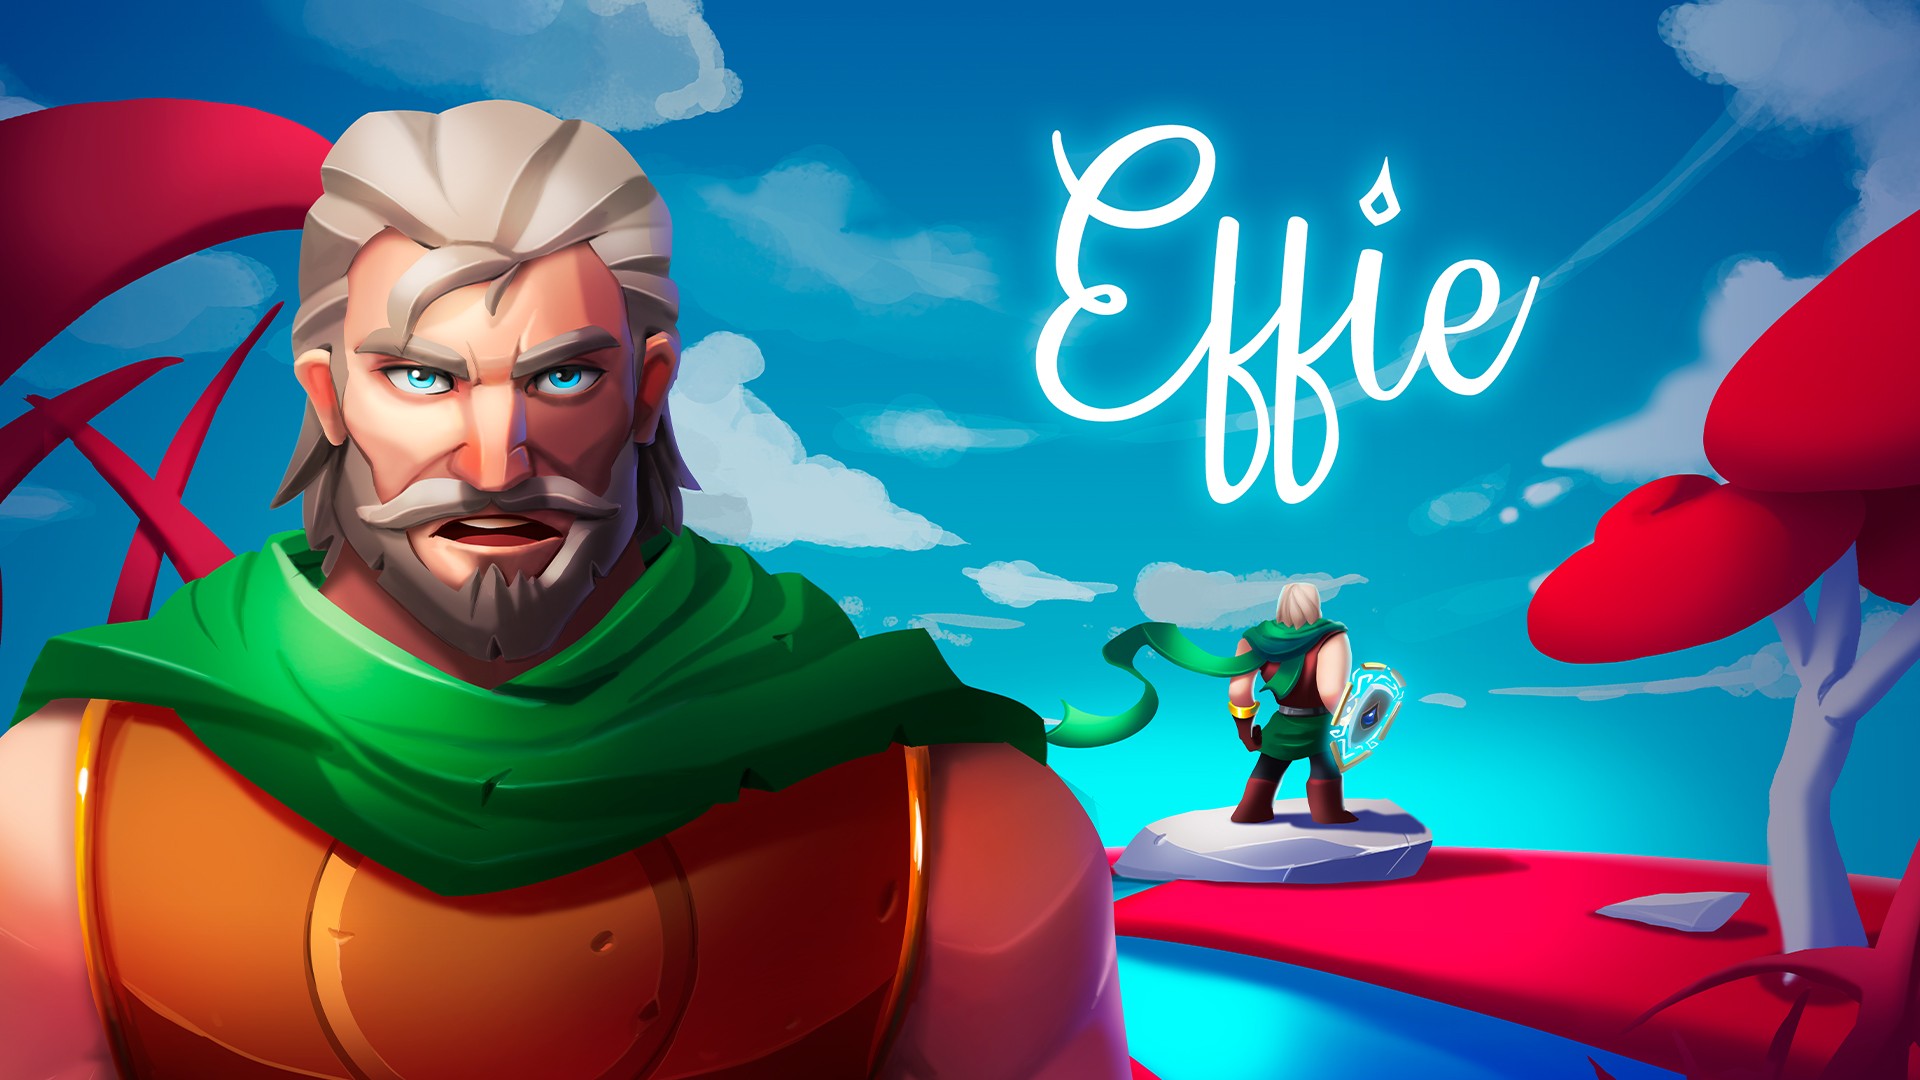 Fantasy Action Adventure Game Effie Is Now Available Best Curated Esports And Gaming News For Southeast Asia And Beyond At Your Fingertips - roblox monster mania cursed sword